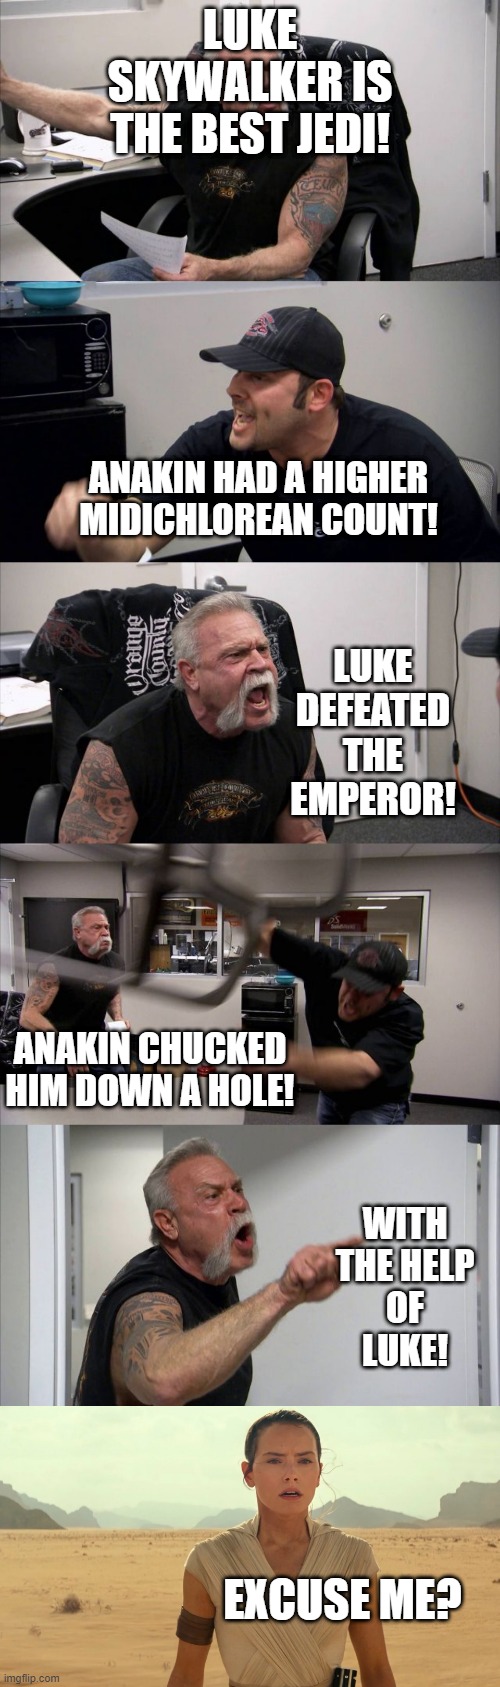 LUKE SKYWALKER IS THE BEST JEDI! ANAKIN HAD A HIGHER MIDICHLOREAN COUNT! LUKE DEFEATED THE EMPEROR! ANAKIN CHUCKED HIM DOWN A HOLE! WITH THE HELP OF LUKE! EXCUSE ME? | image tagged in memes,american chopper argument | made w/ Imgflip meme maker